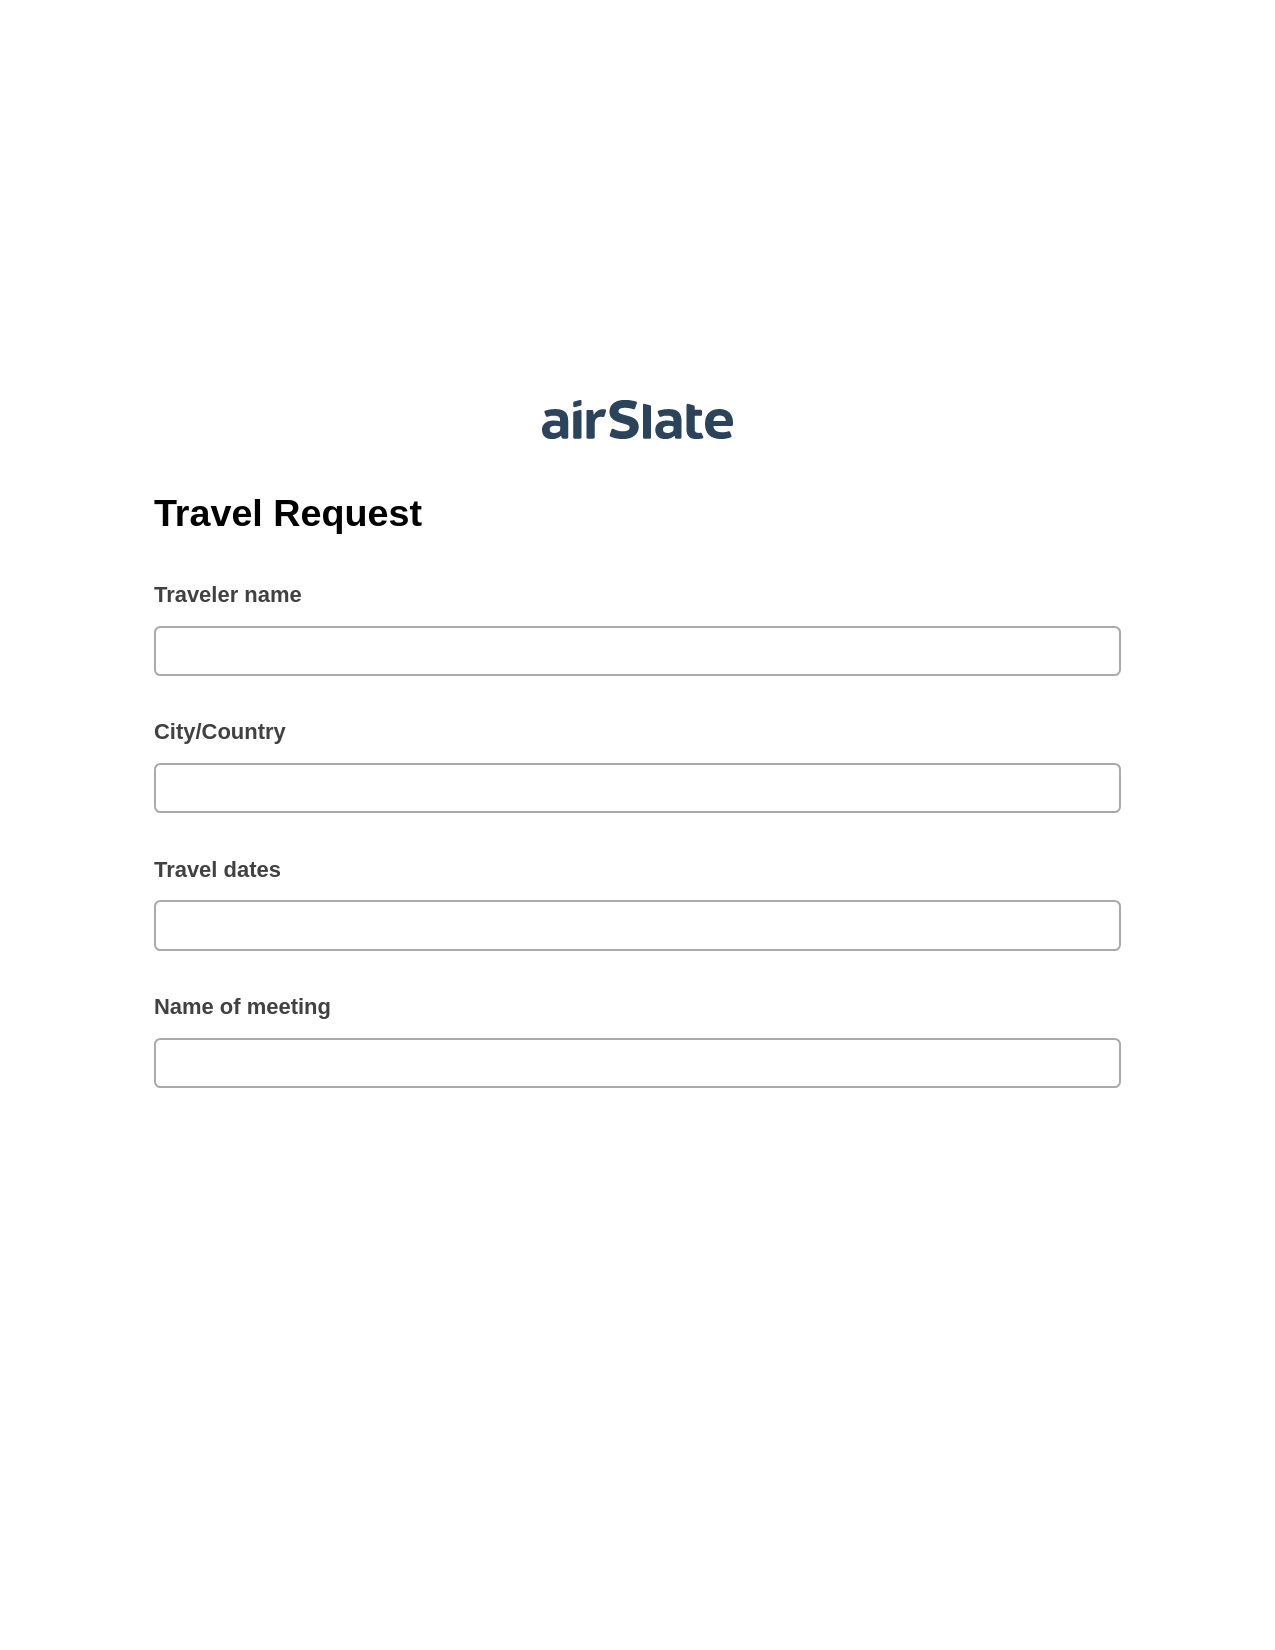 Travel Request Pre-fill Slate from MS Dynamics 365 Records Bot, Update NetSuite Records Bot, Google Drive Bot